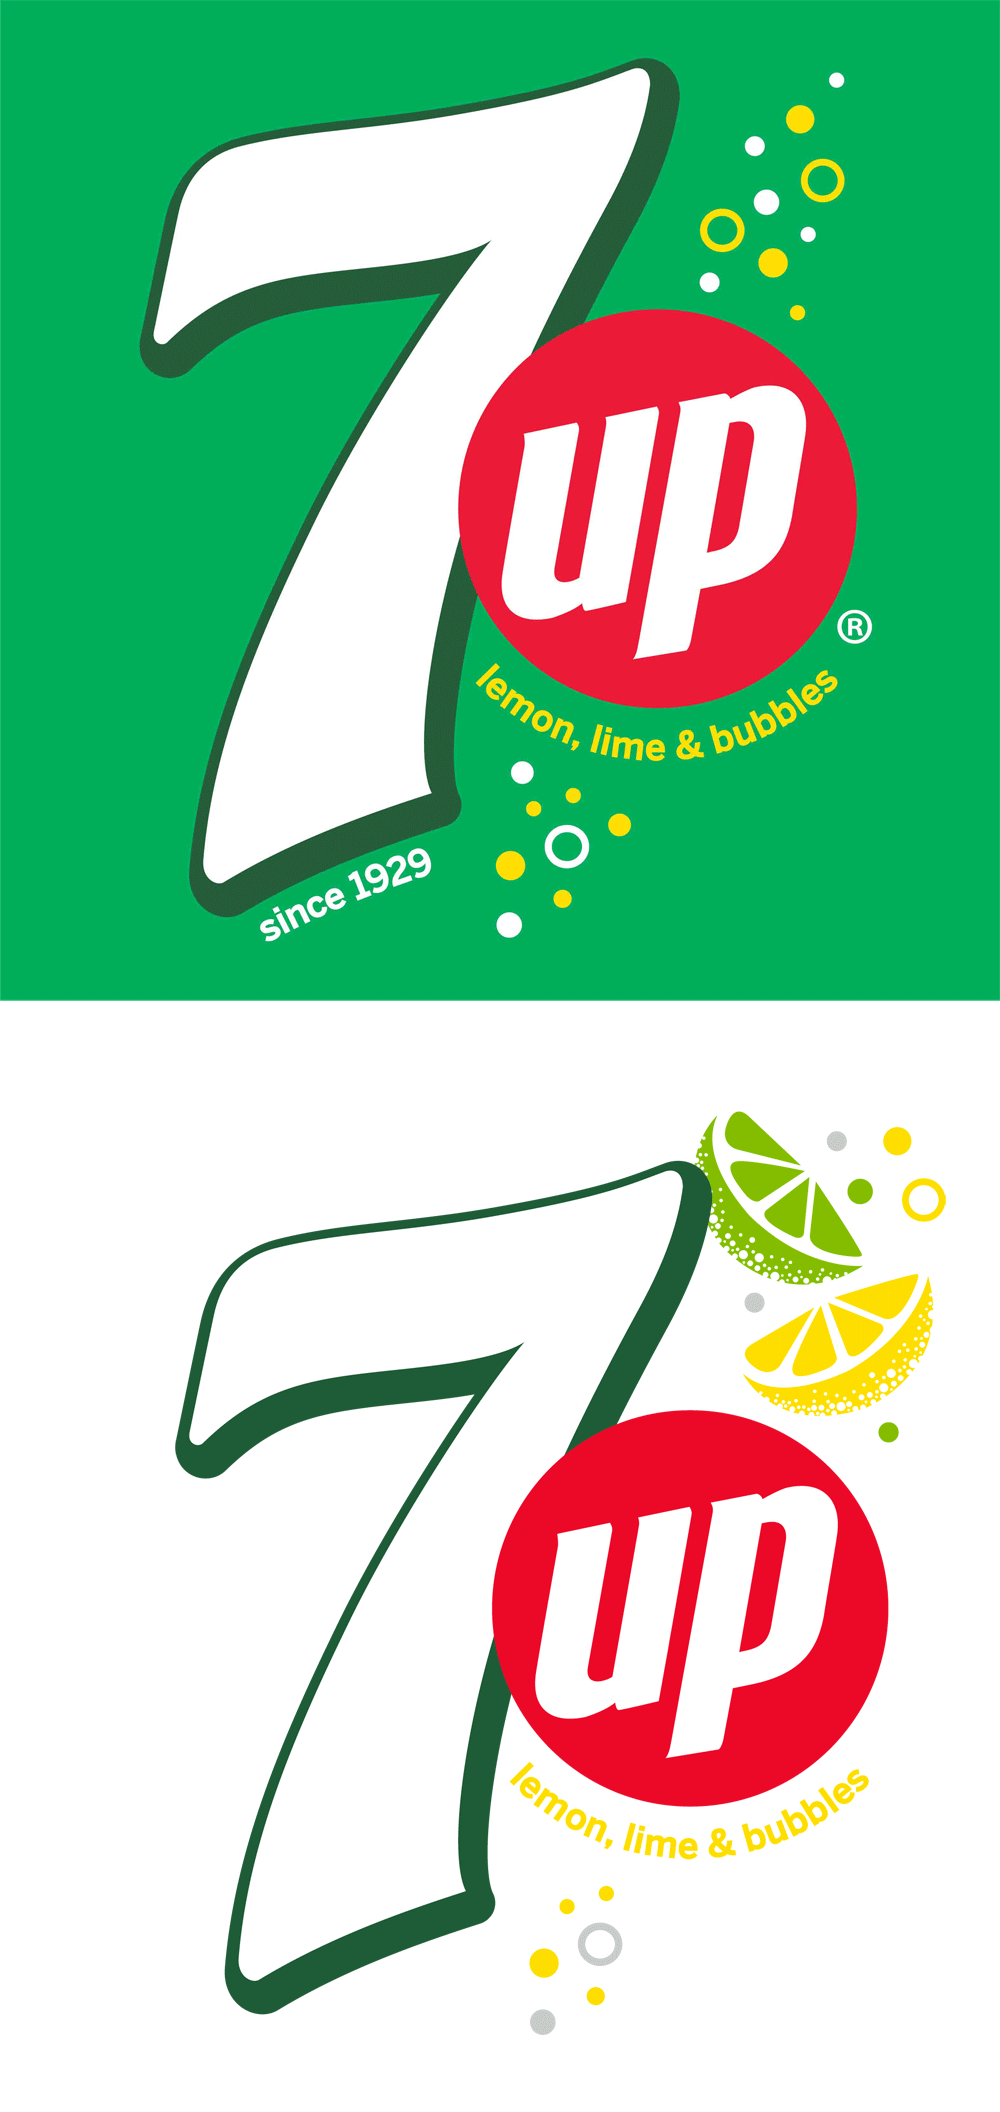 7up_2014_logo_detail_official-1